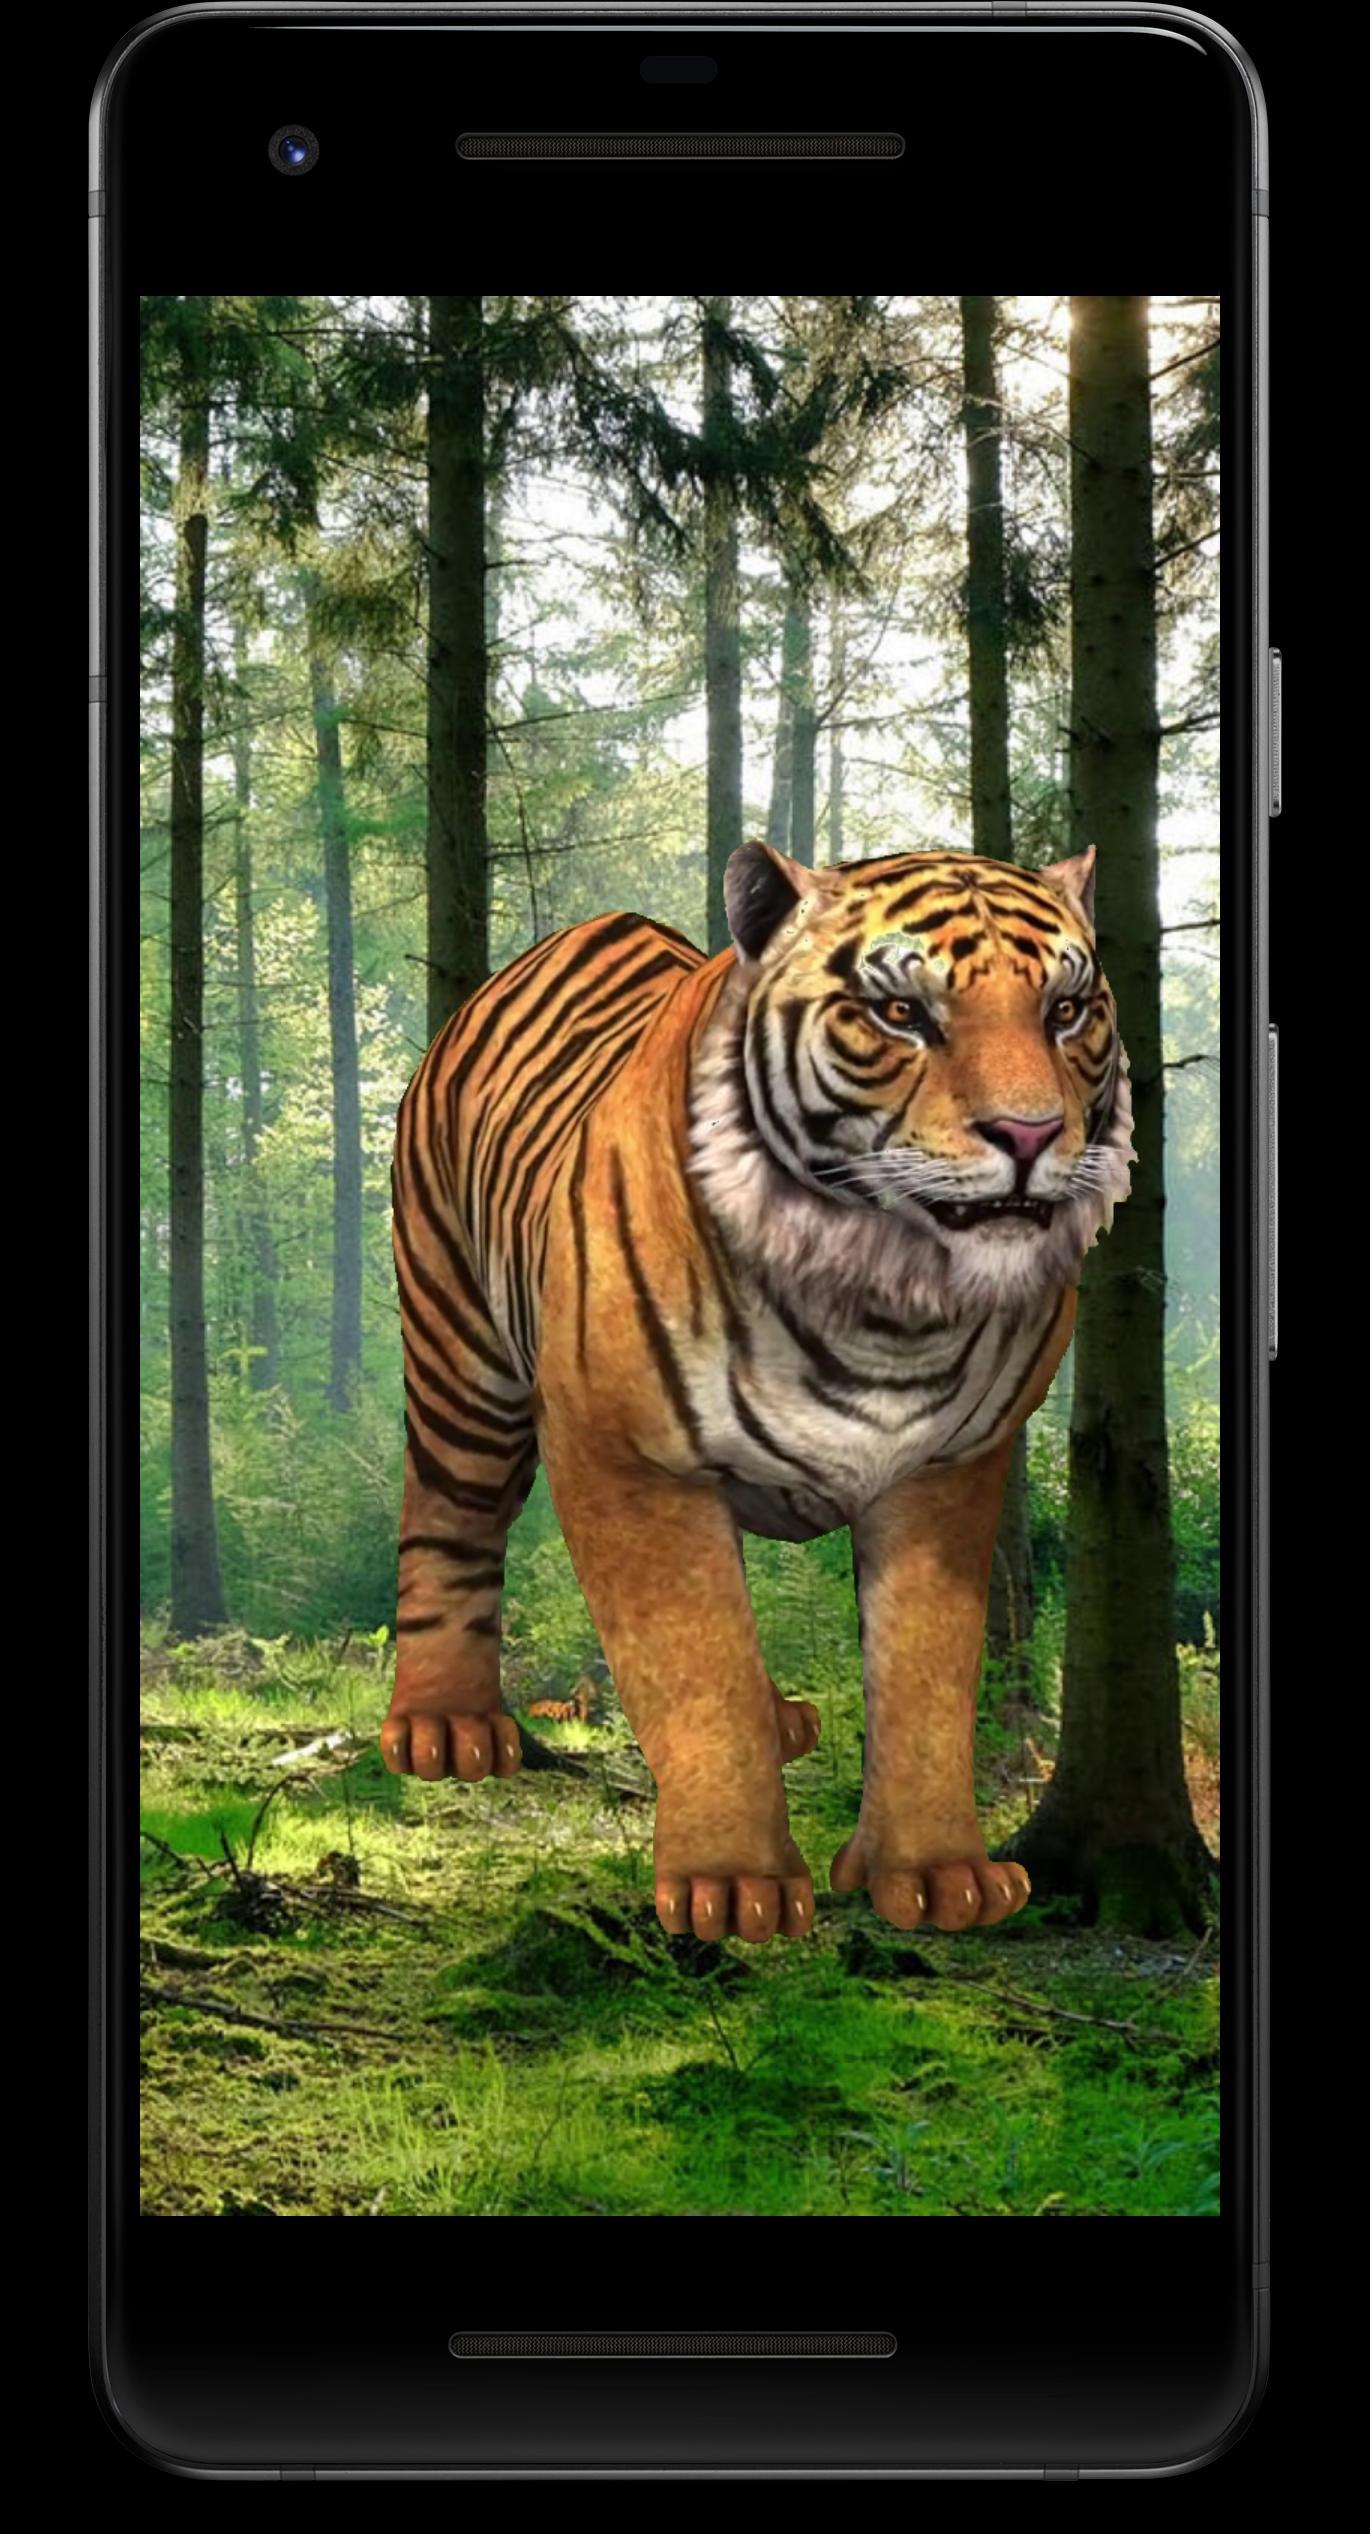 Tiger 3d Video Live Wallpaper For Android Apk Download